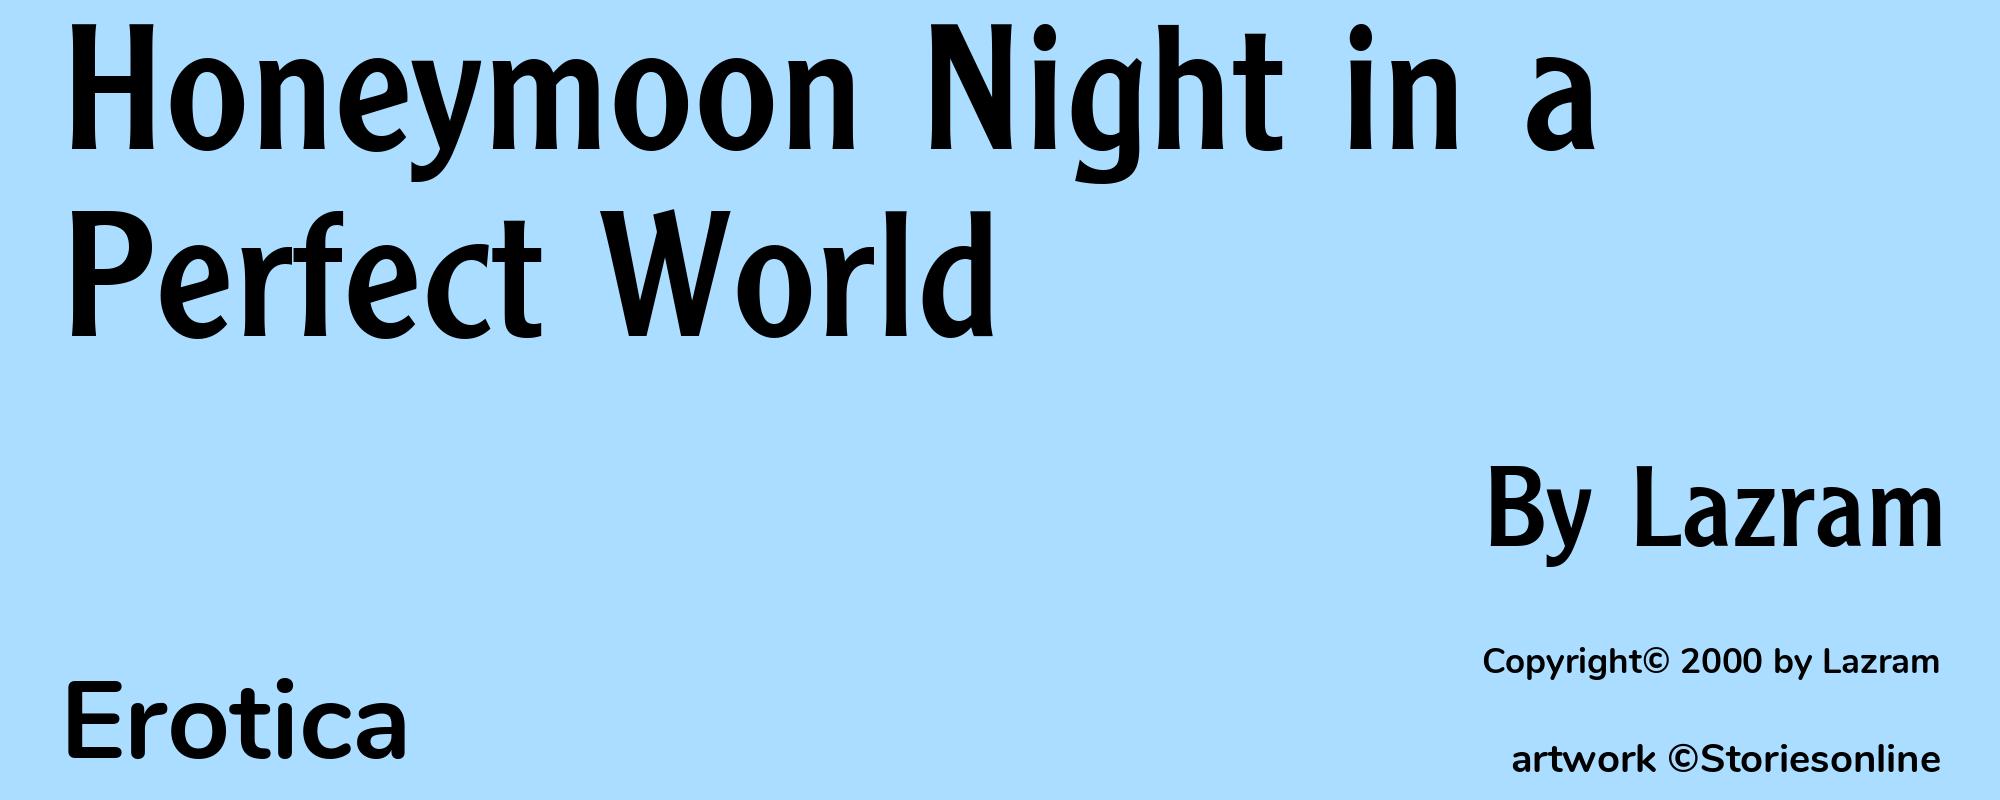 Honeymoon Night in a Perfect World - Cover